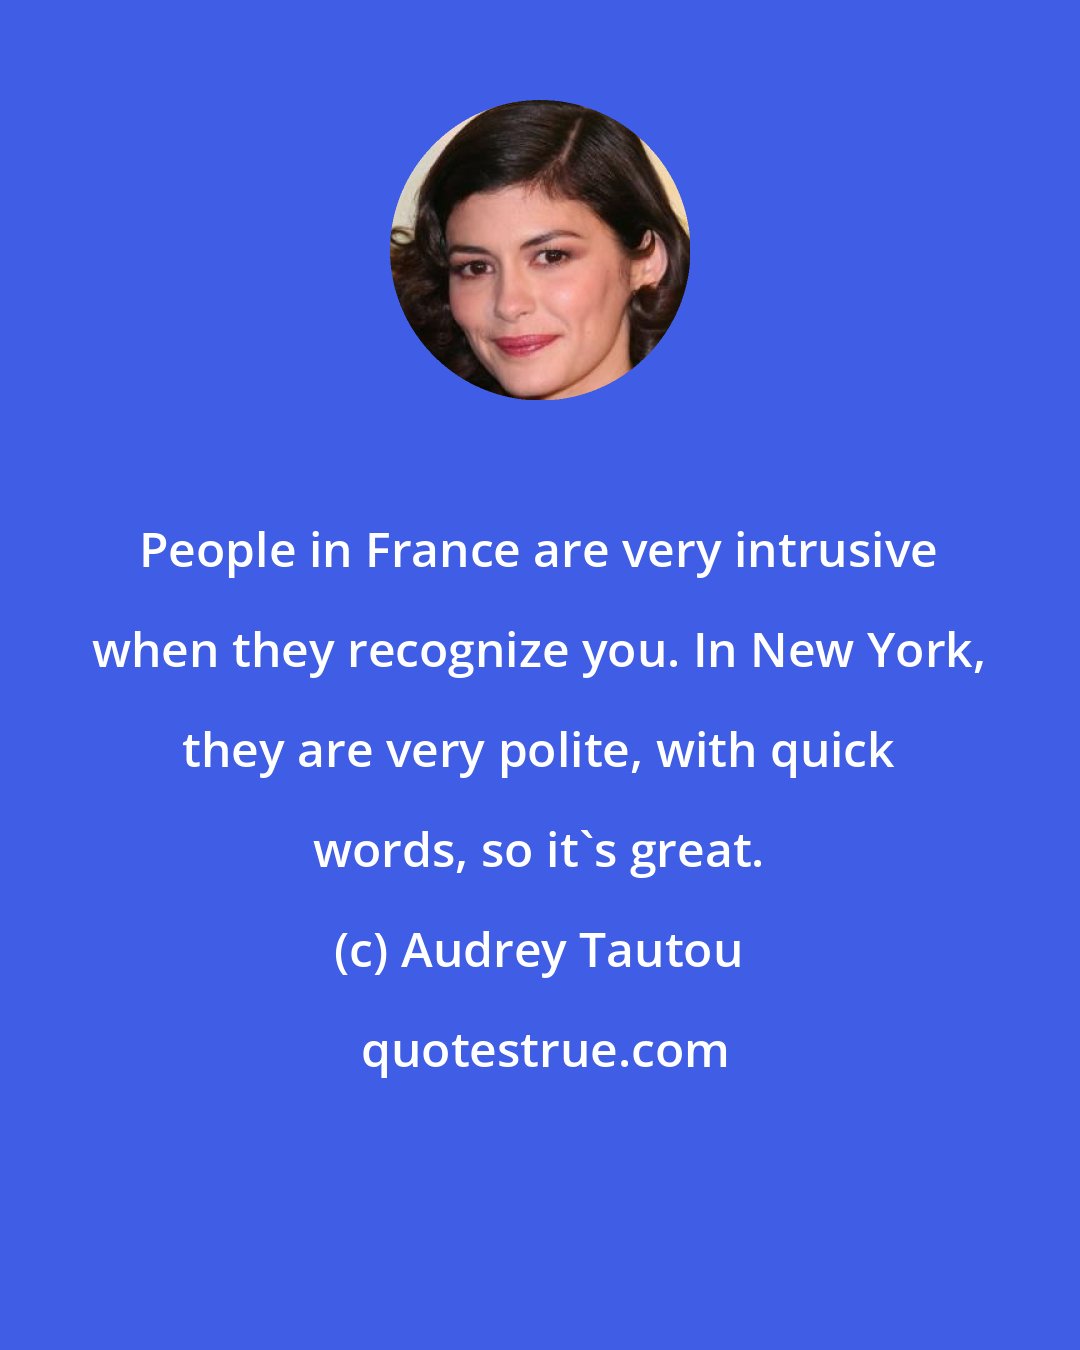 Audrey Tautou: People in France are very intrusive when they recognize you. In New York, they are very polite, with quick words, so it's great.